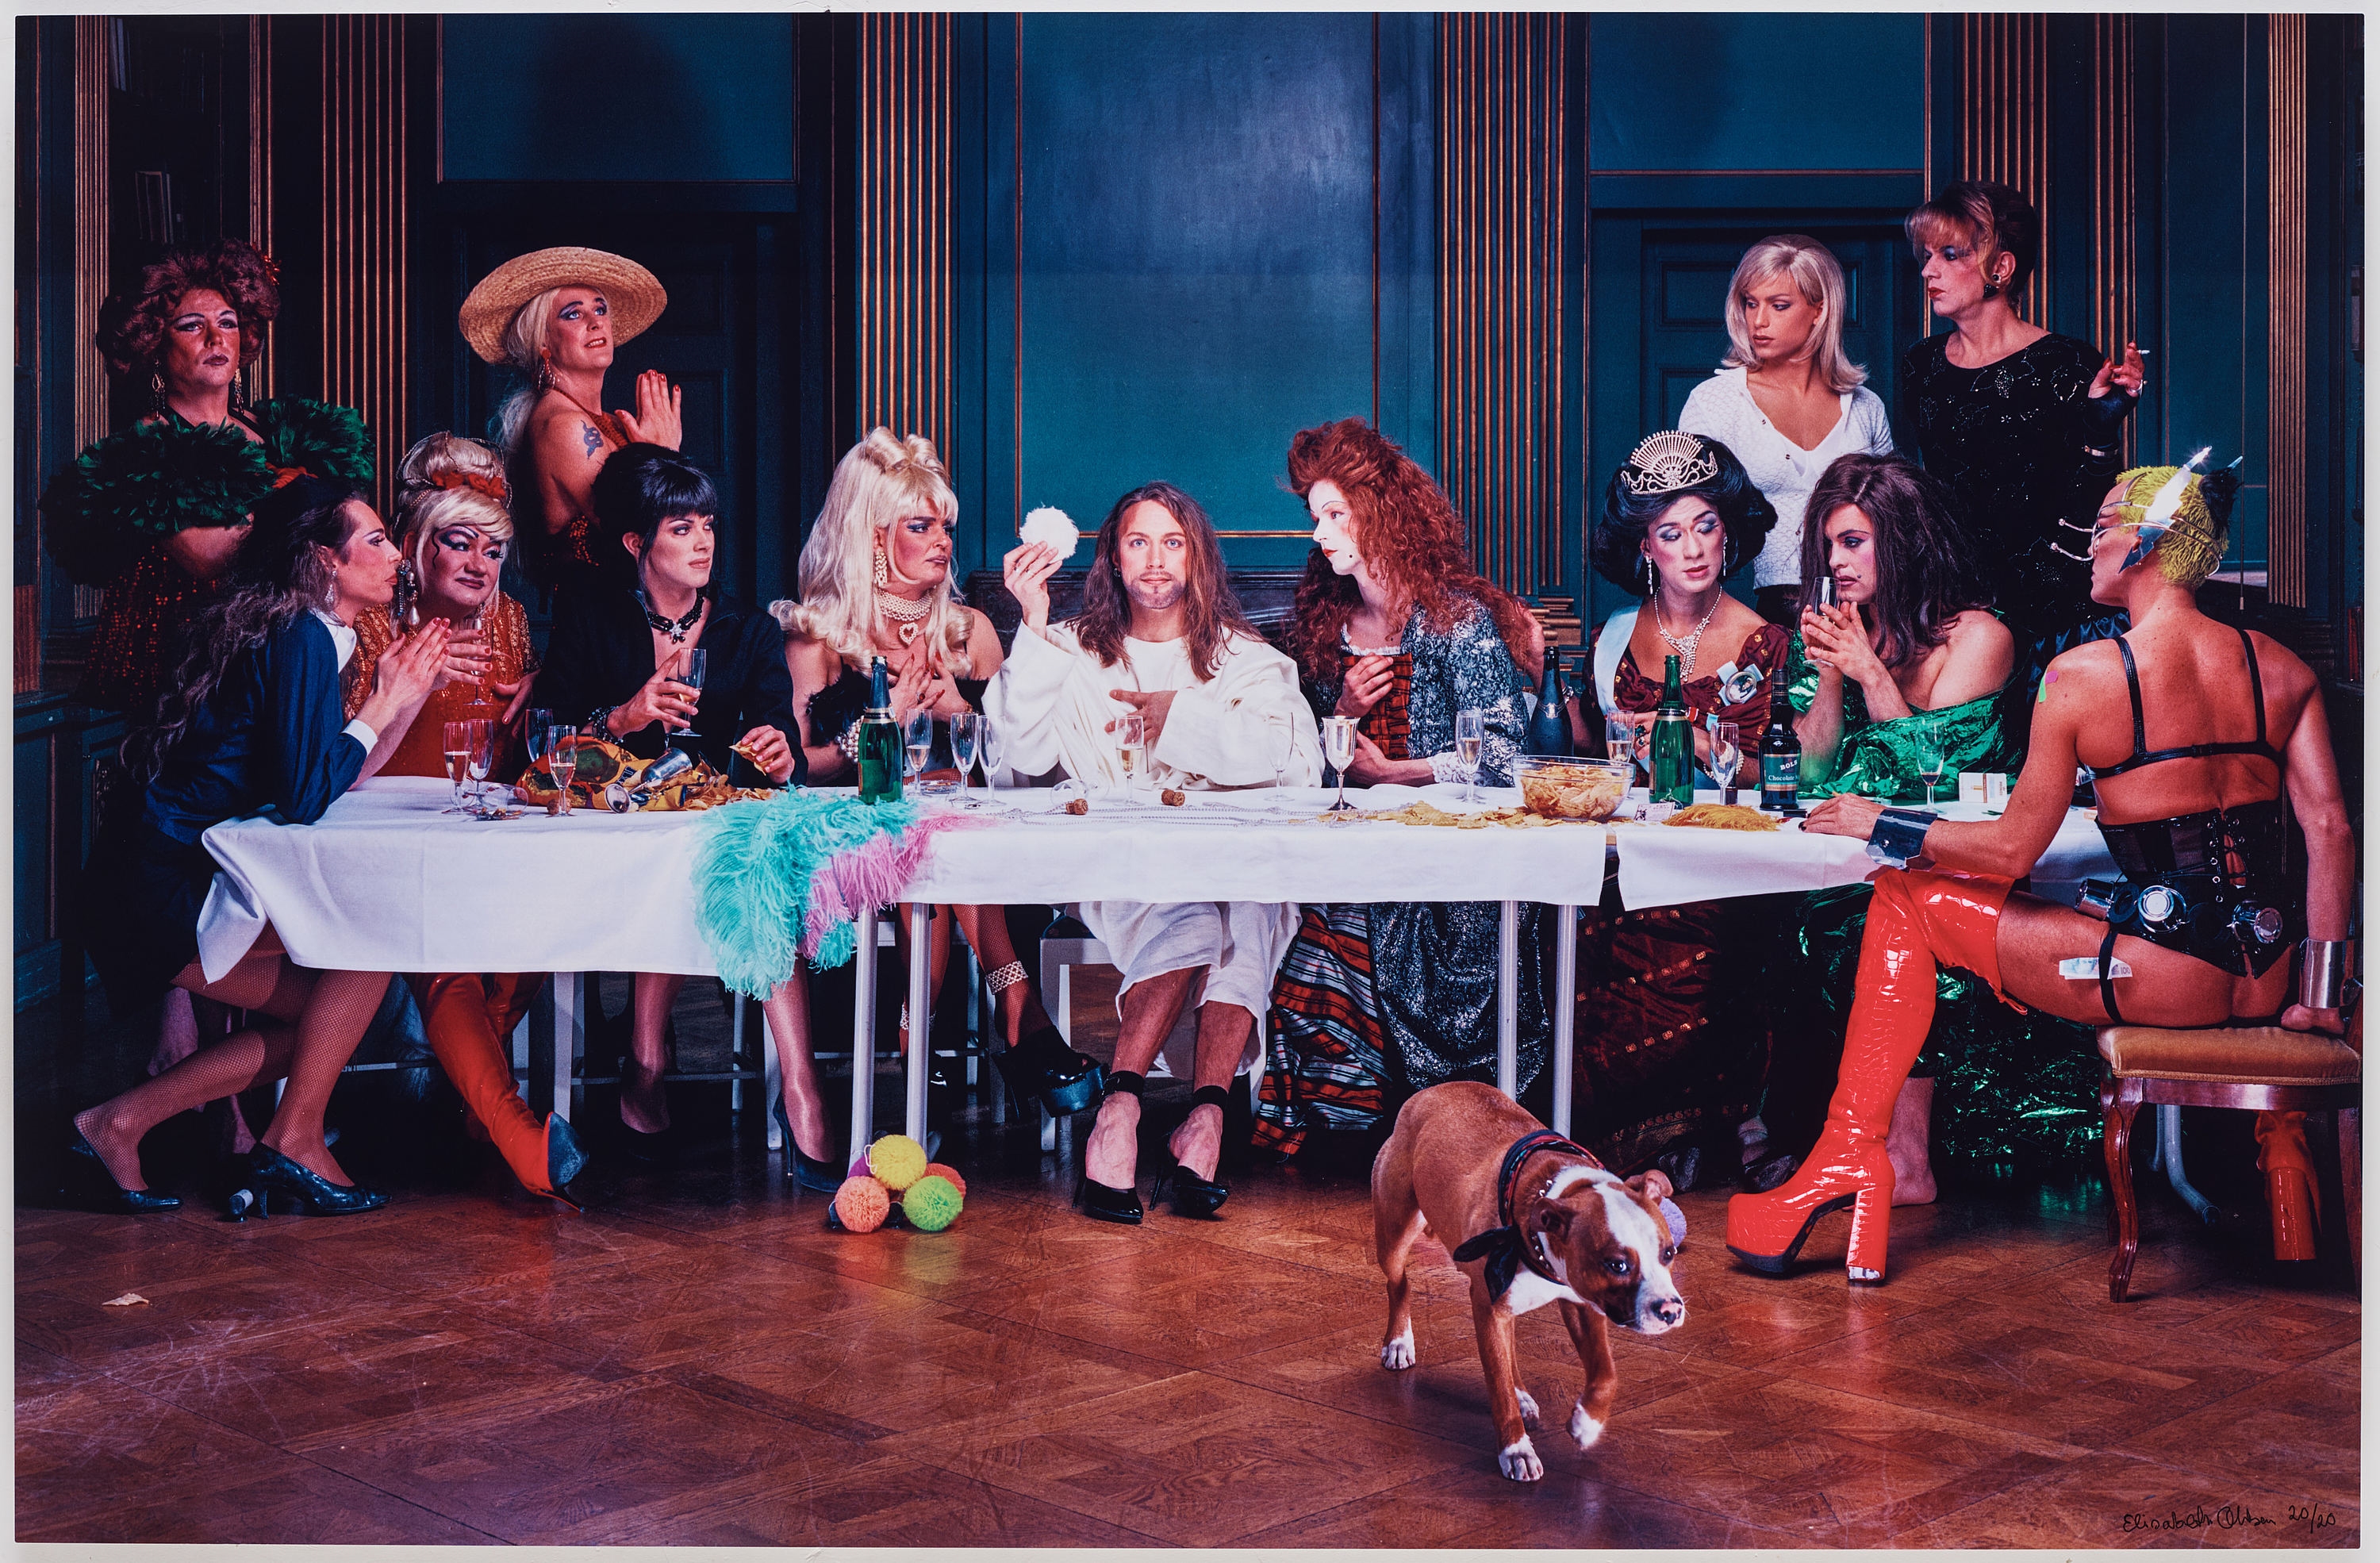 Artwork by Elisabeth Ohlson Wallin, "The Last Supper" from the series "Ecce Homo", 2018, Made of C-print on aluminum